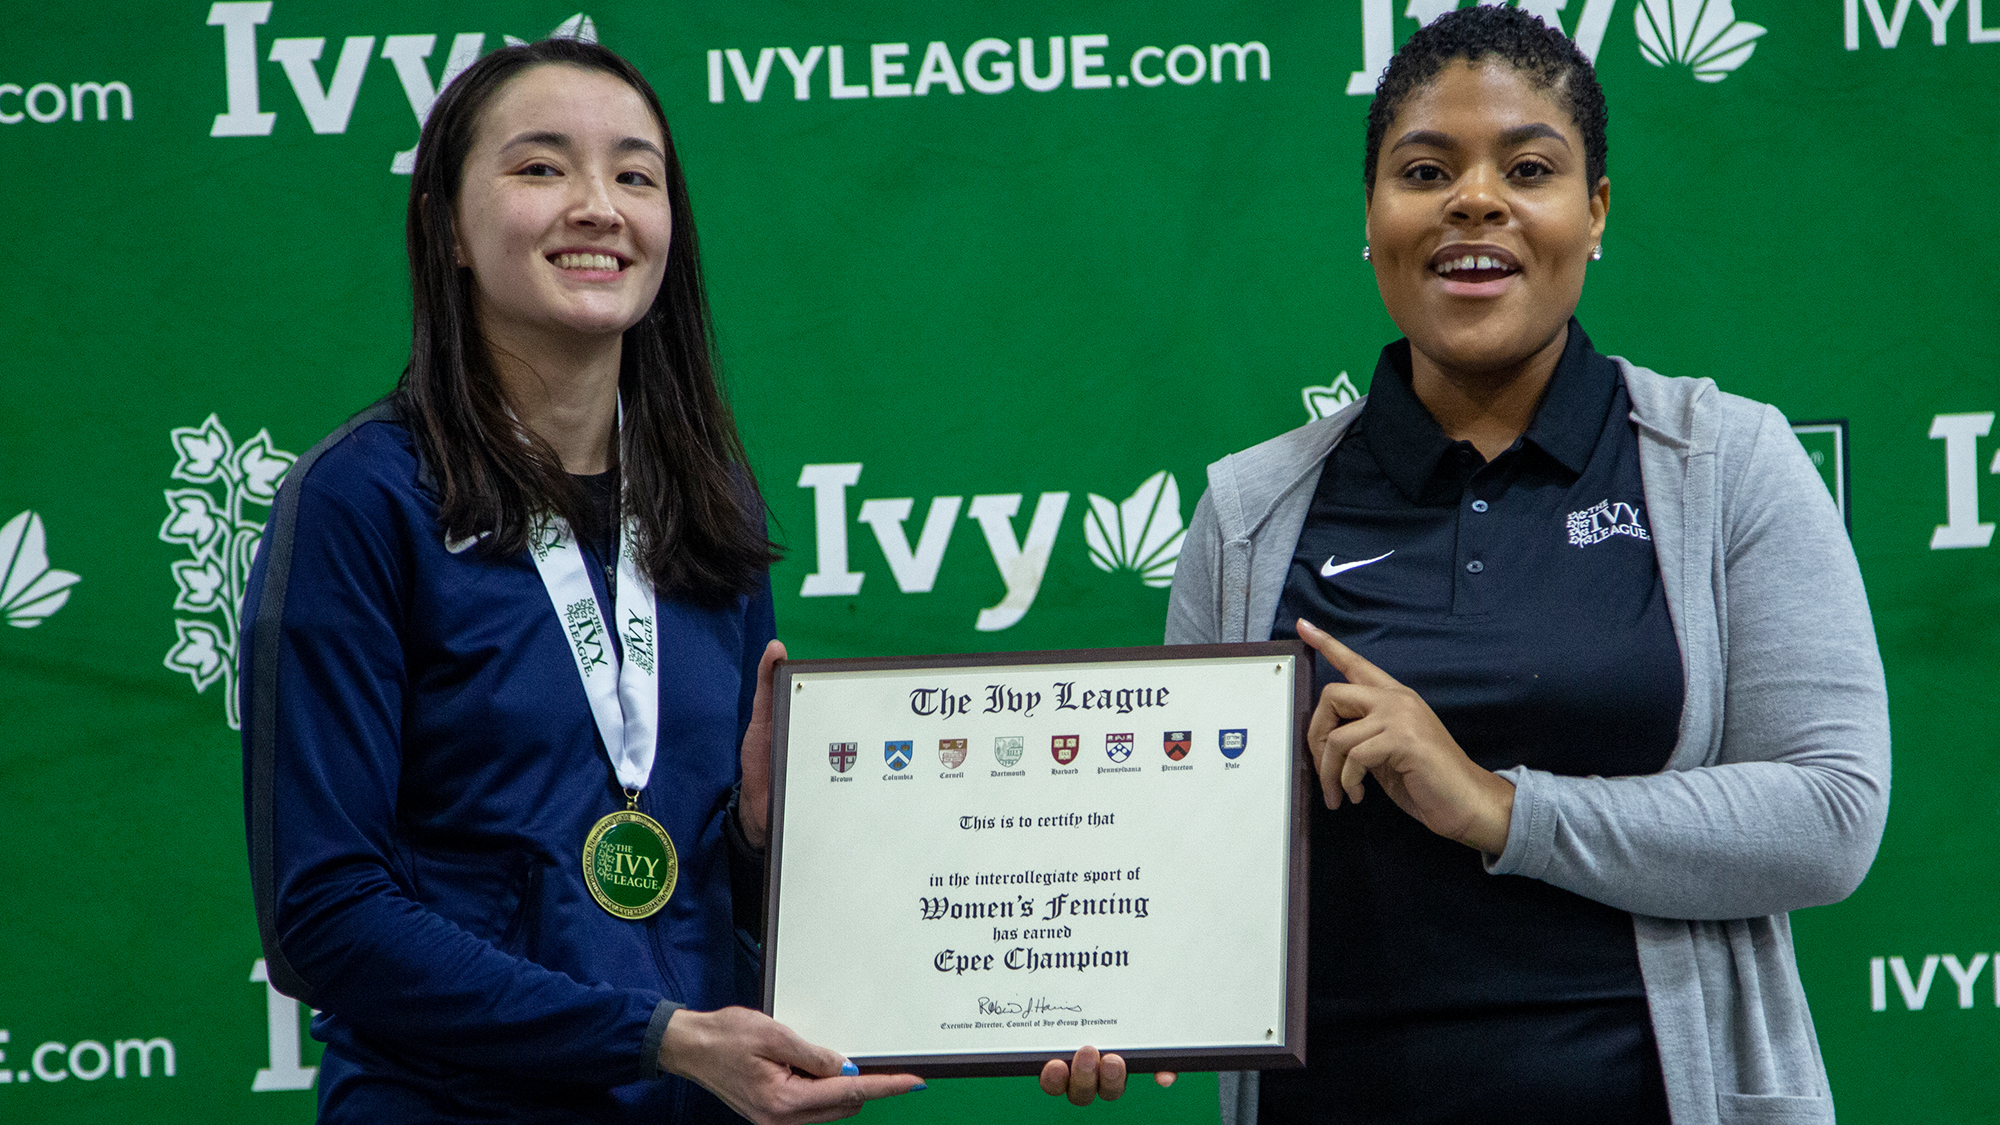 Freshman fencer Chloe Daniel is presented with a plaque celebrating her Ivy epee championship.